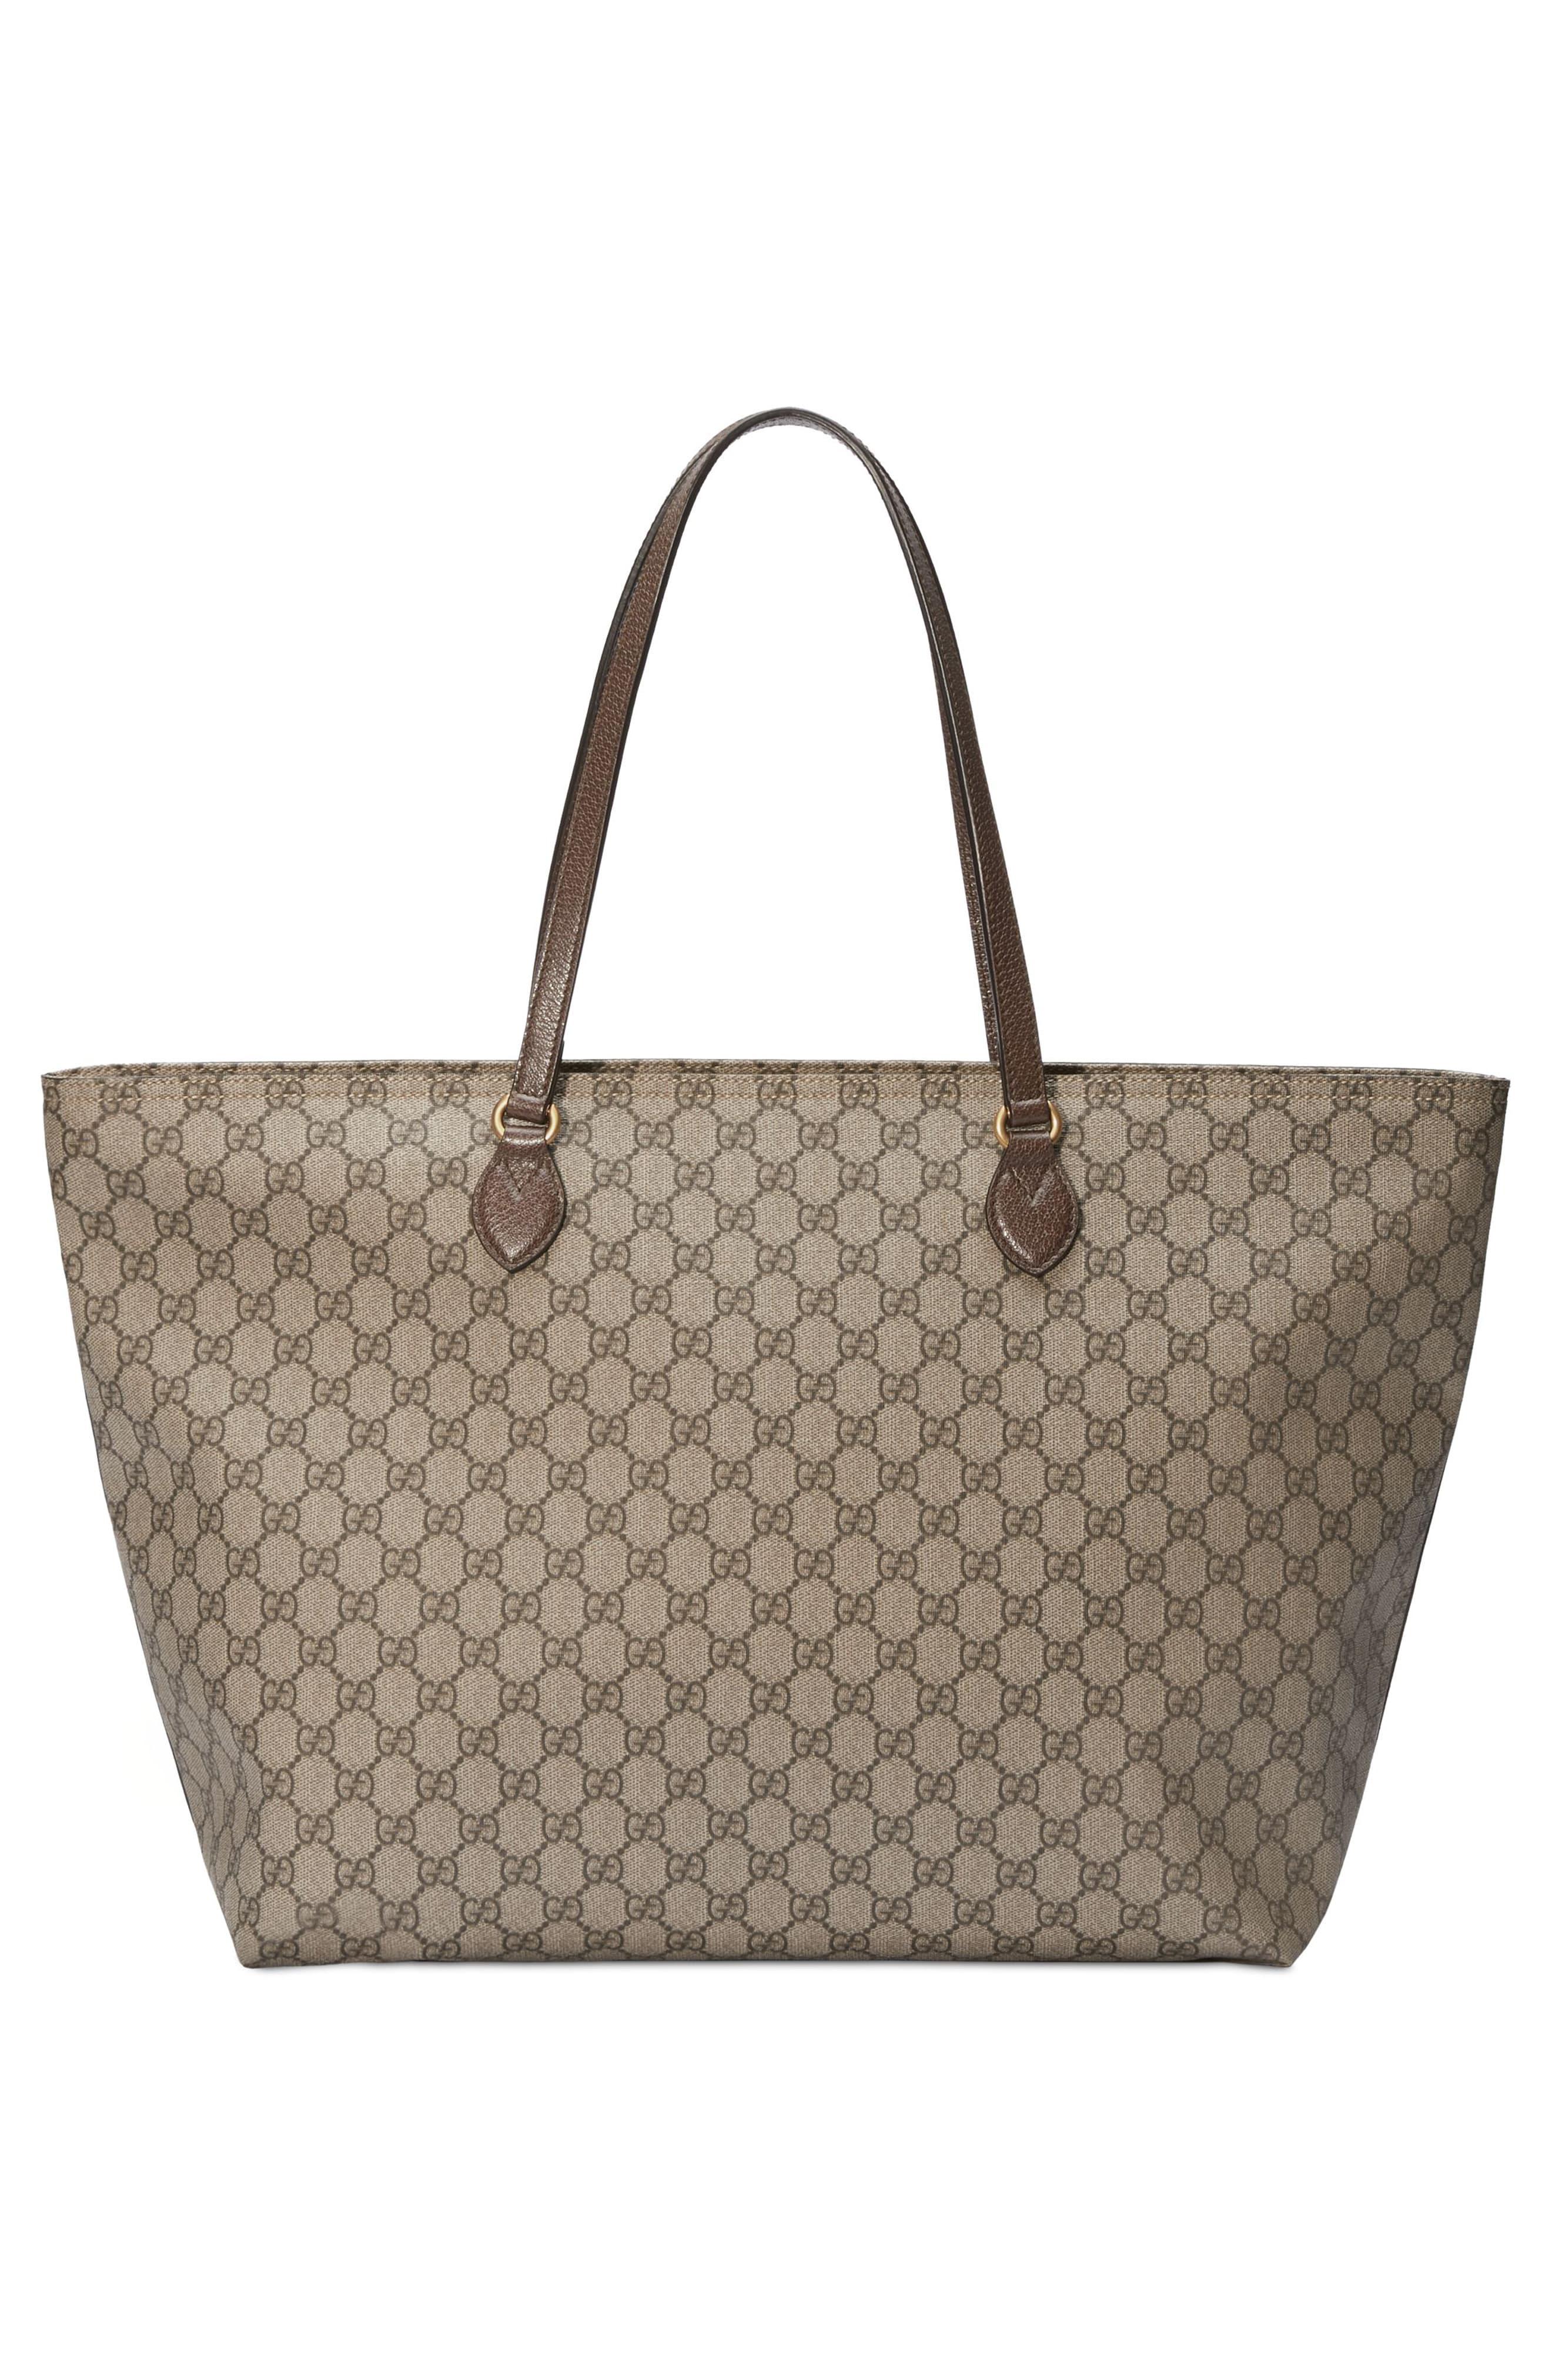 Gucci Ophidia Medium Soft GG Supreme Canvas Tote Bag in Brown | Lyst